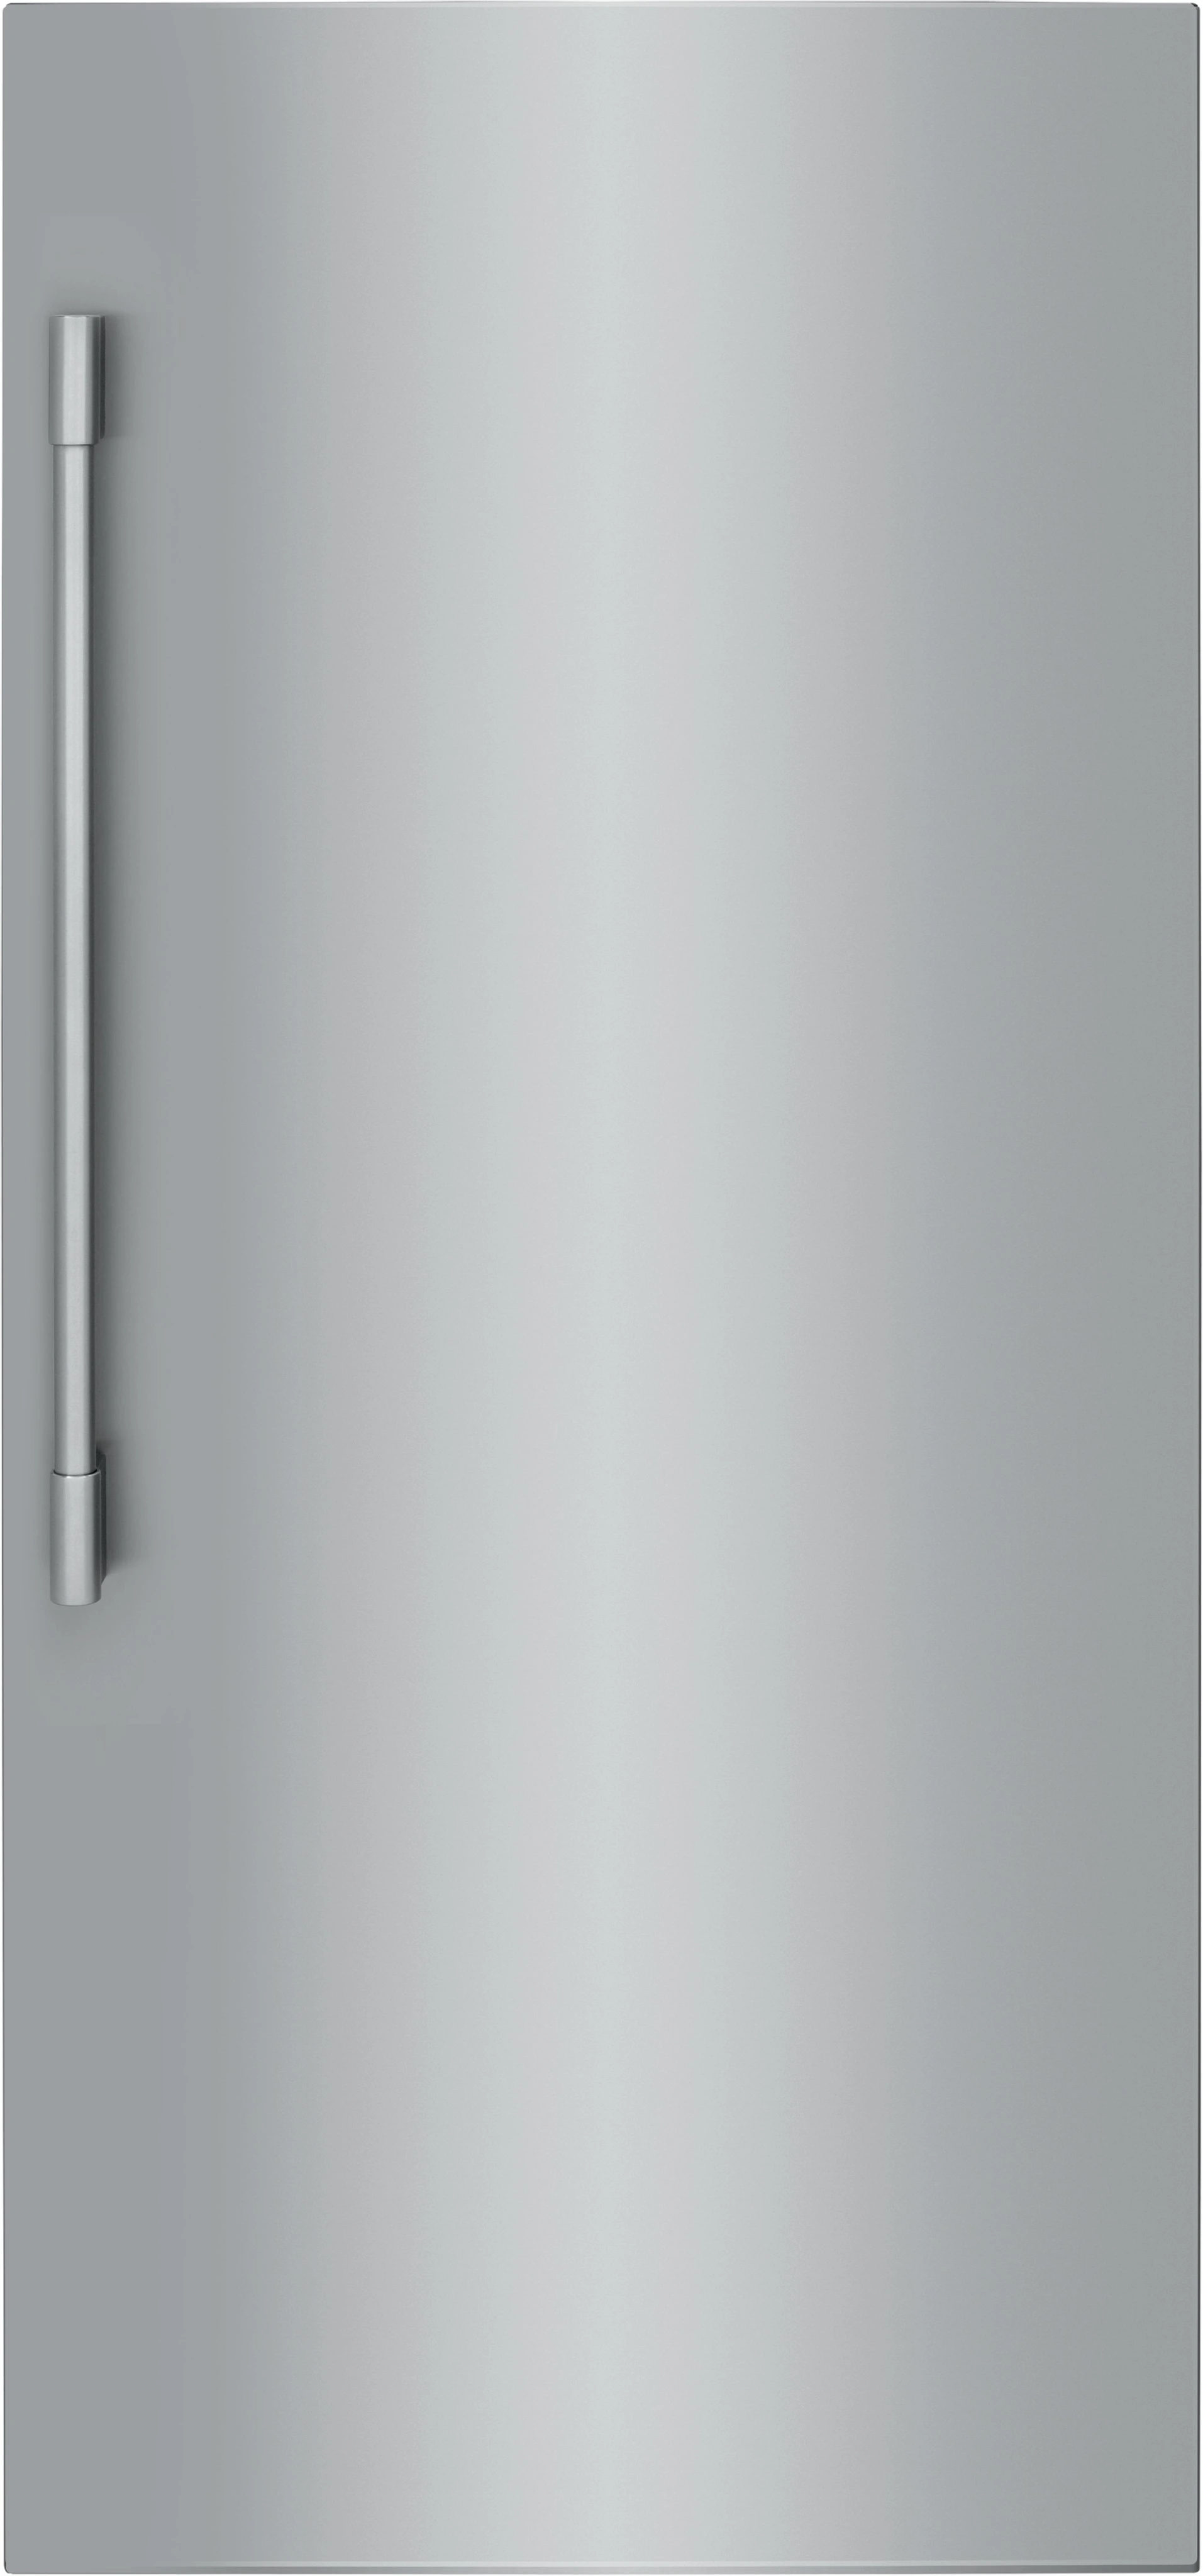 Front view of the Miele K 2902 Vi freezerless refrigerator 